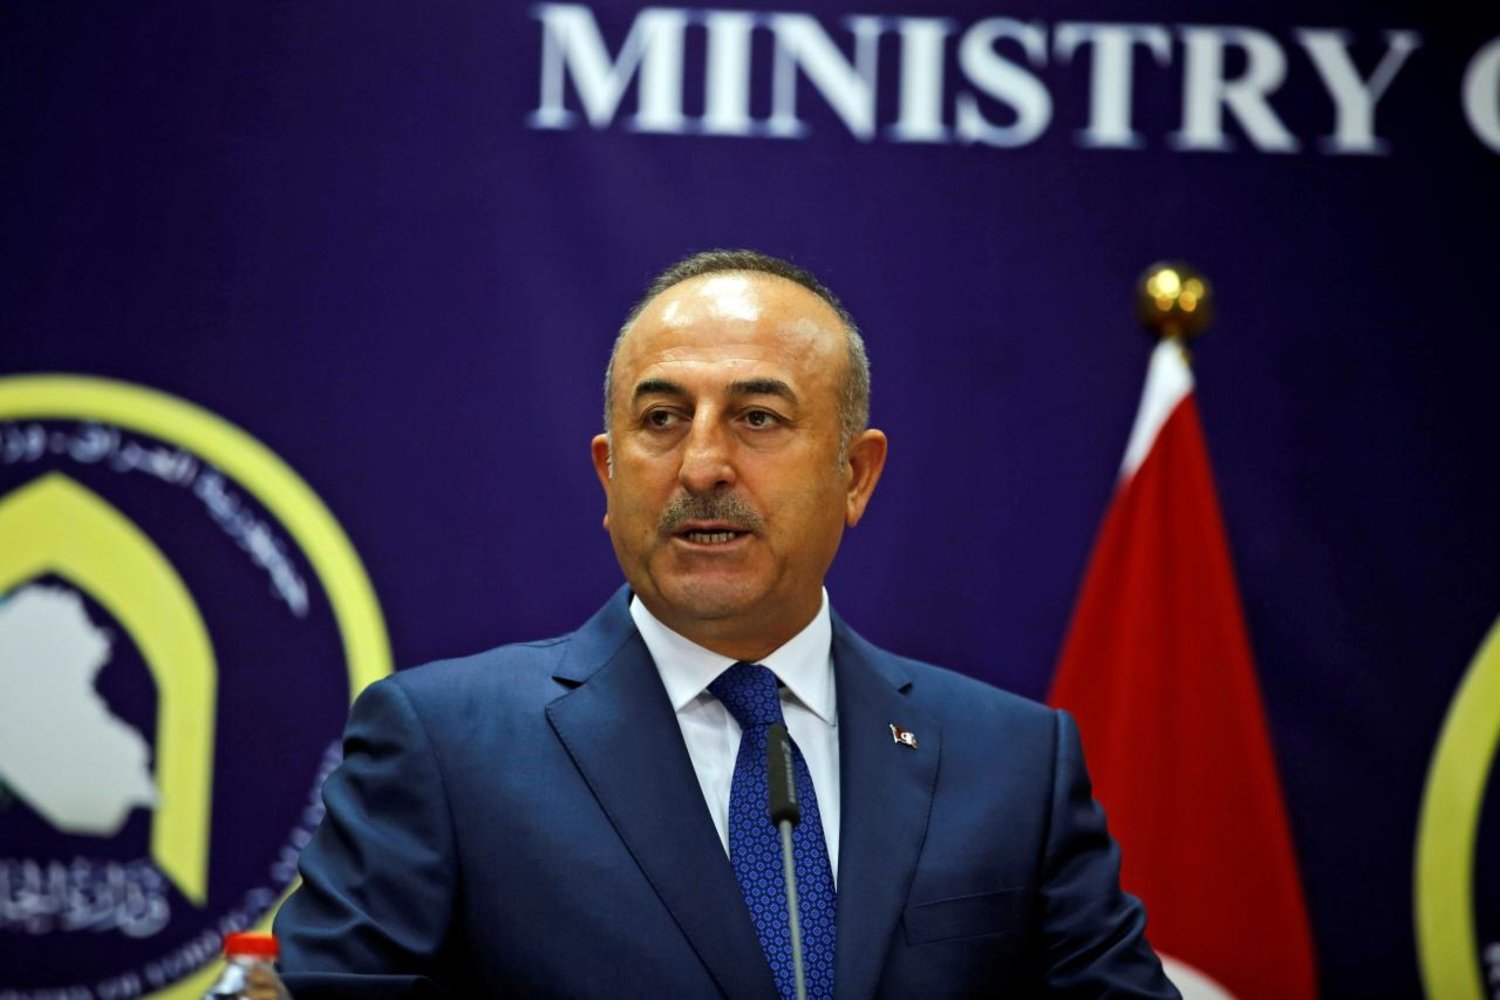 Turkish foreign minister Mevlut Cavusoglu speaks during a joint news conference with Iraqi Foreign Minister Ibrahim al-Jaafari (not pictured) in Baghdad, Iraq August 23, 2017. REUTERS/Khalid al Mousily 